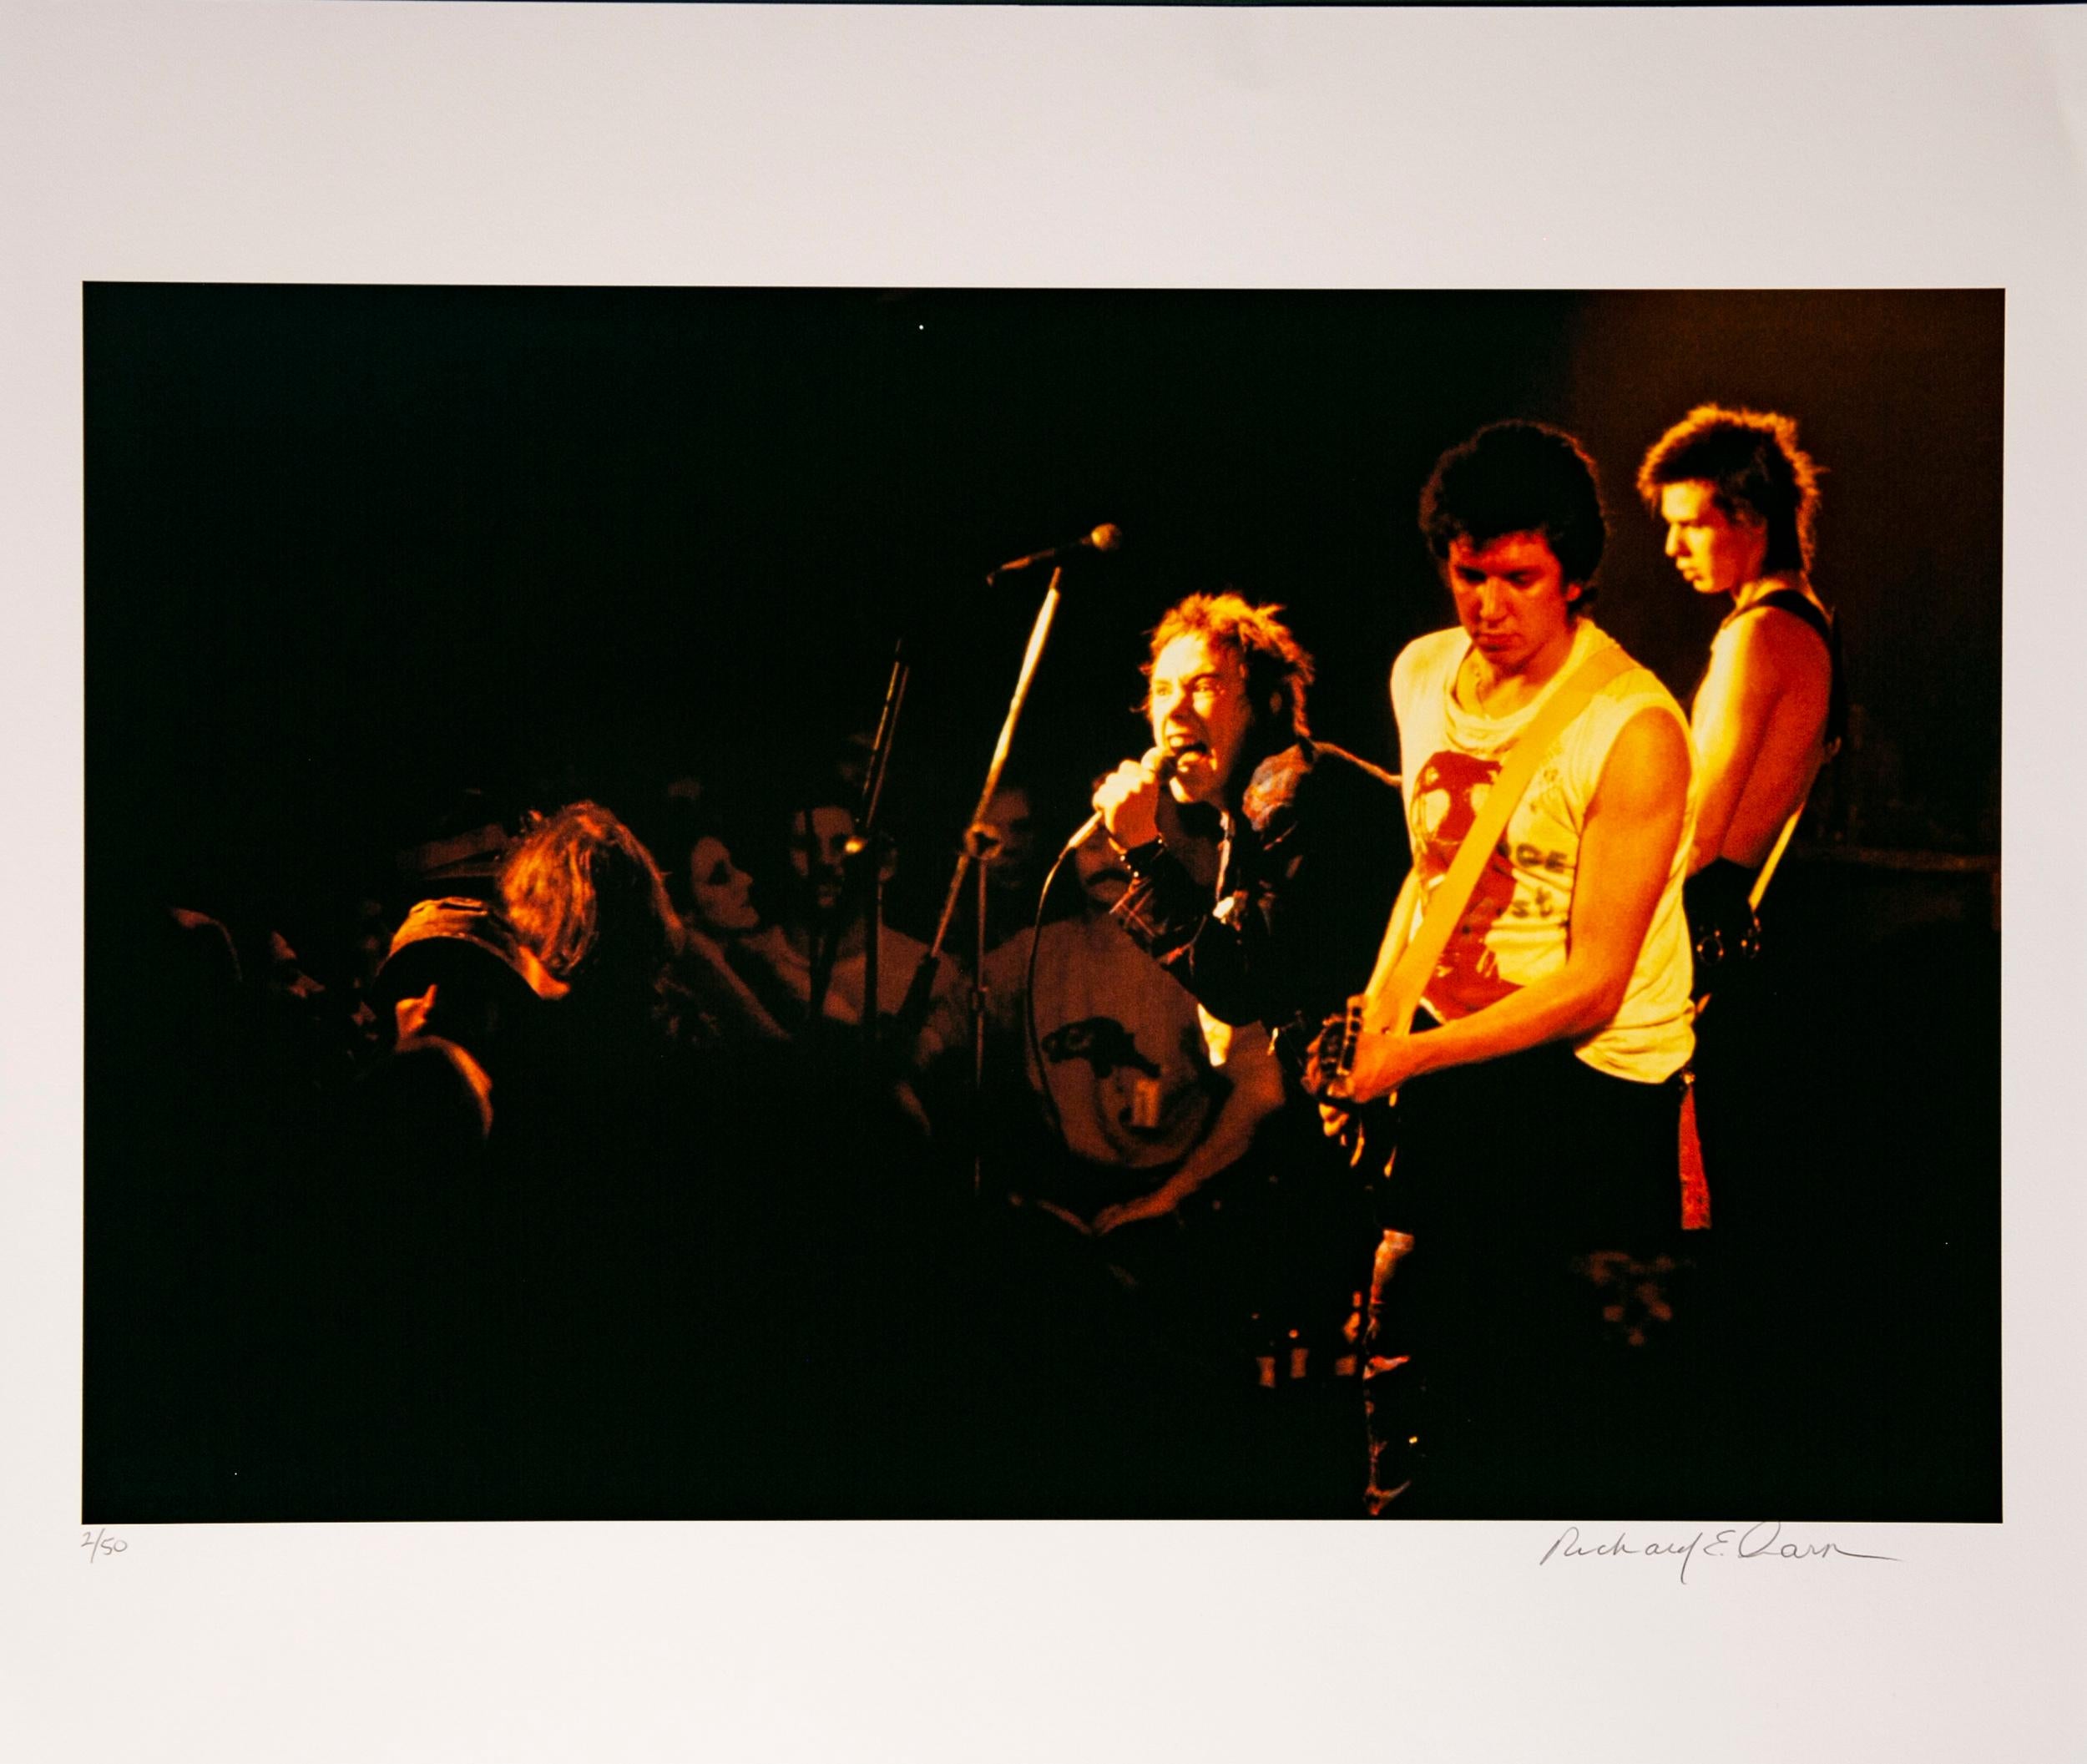 Richard E. Aaron Color Photograph - Sid Vicious with Band Photographed in Color on Hahnemuehle paper